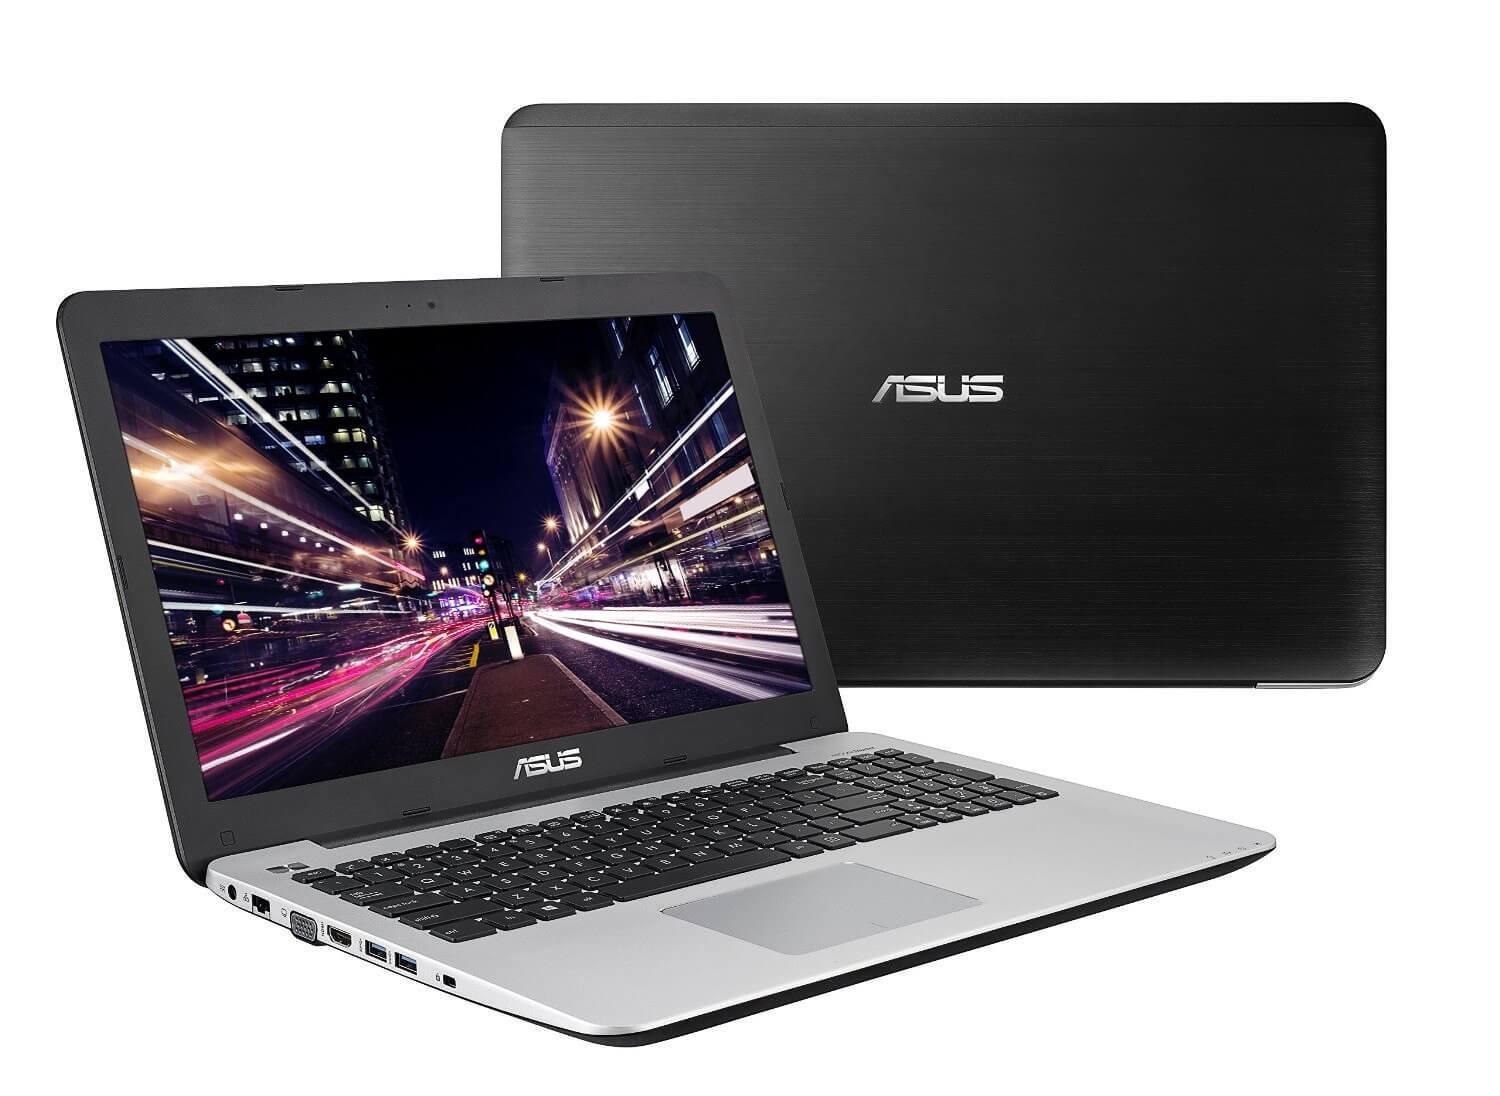 The F555LA From Asus Compared